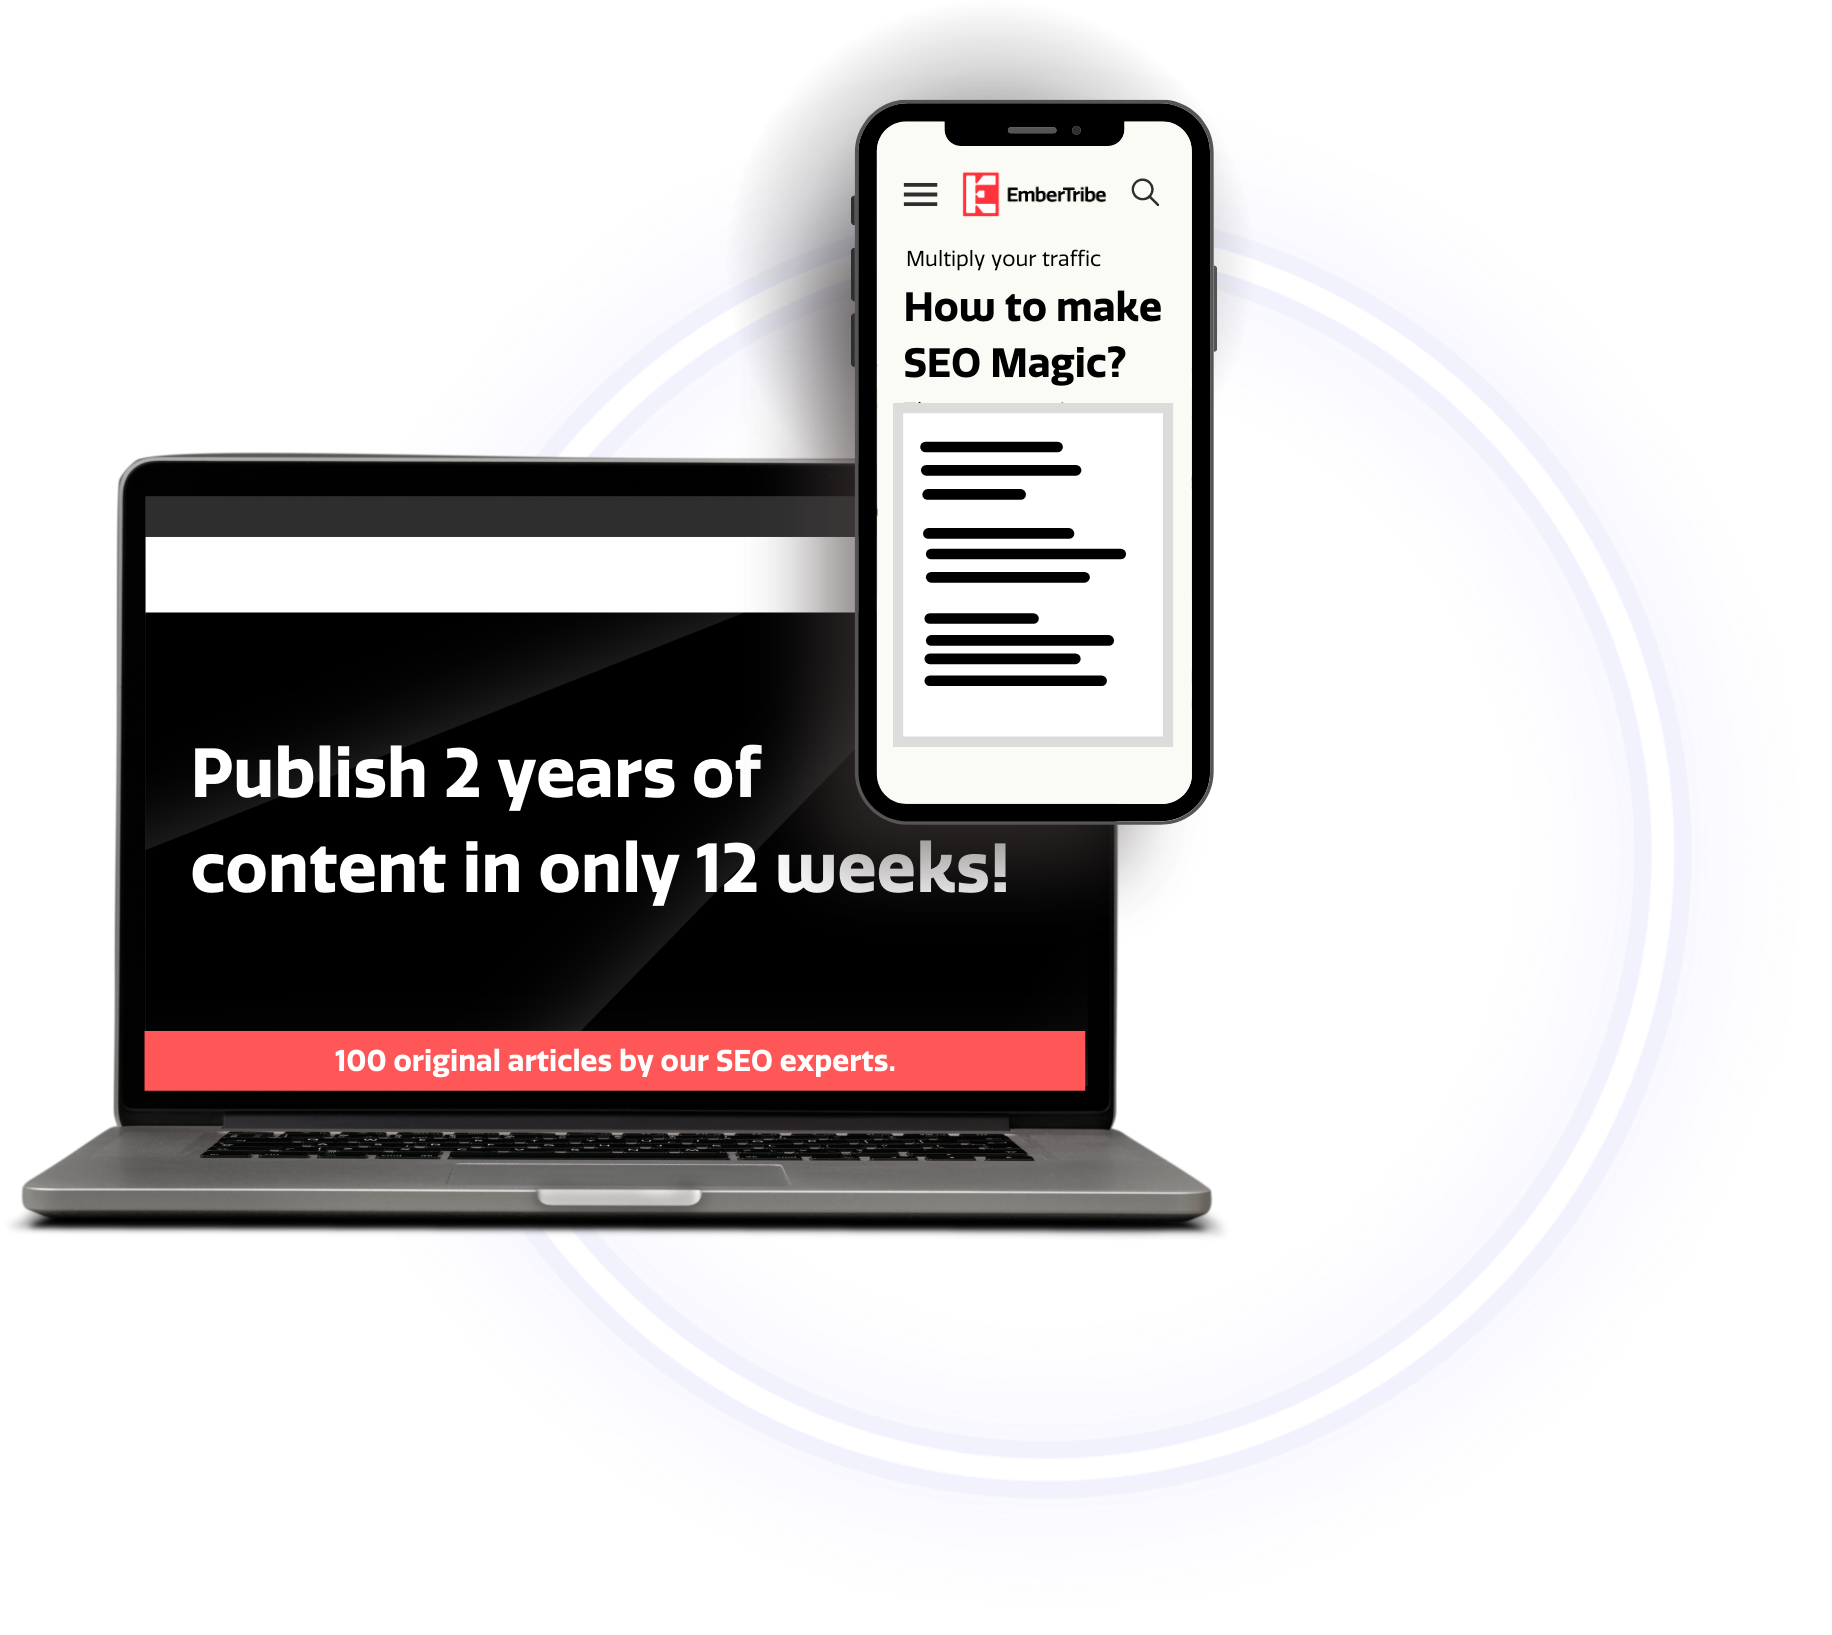 ClusterMagic Publish 2 years of content in 12 weeks